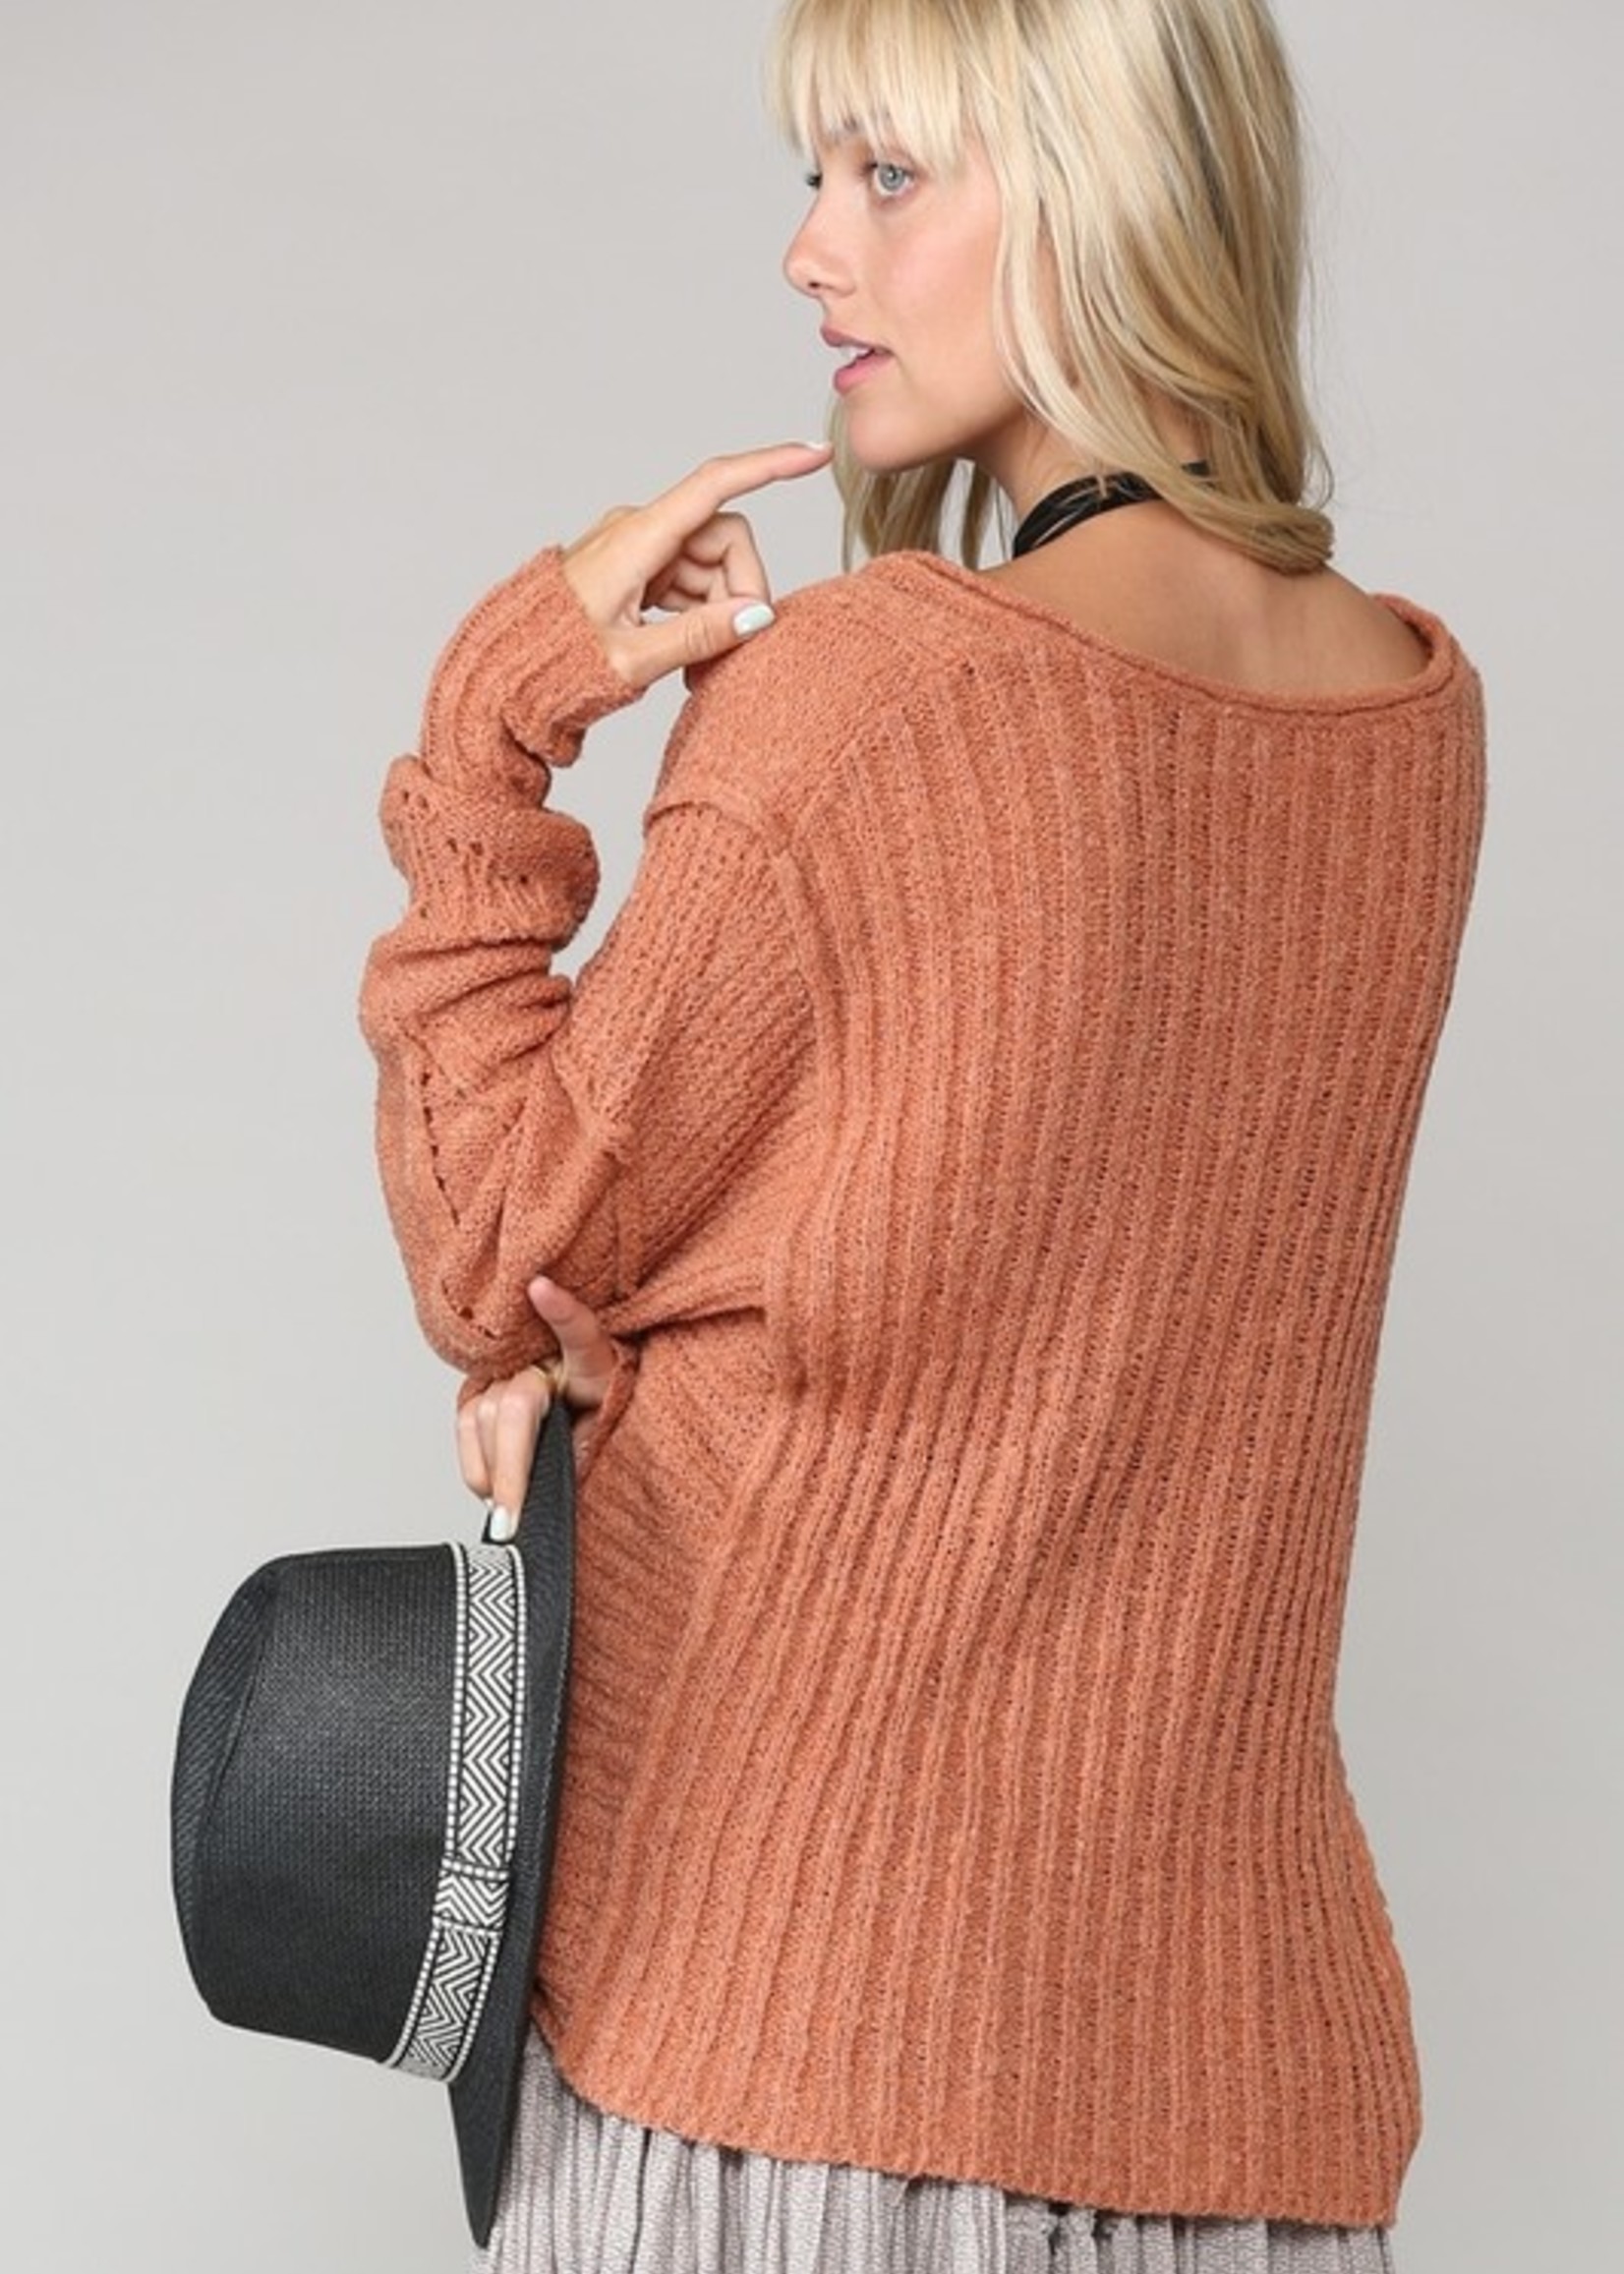 Rib accent sweater 2 colors